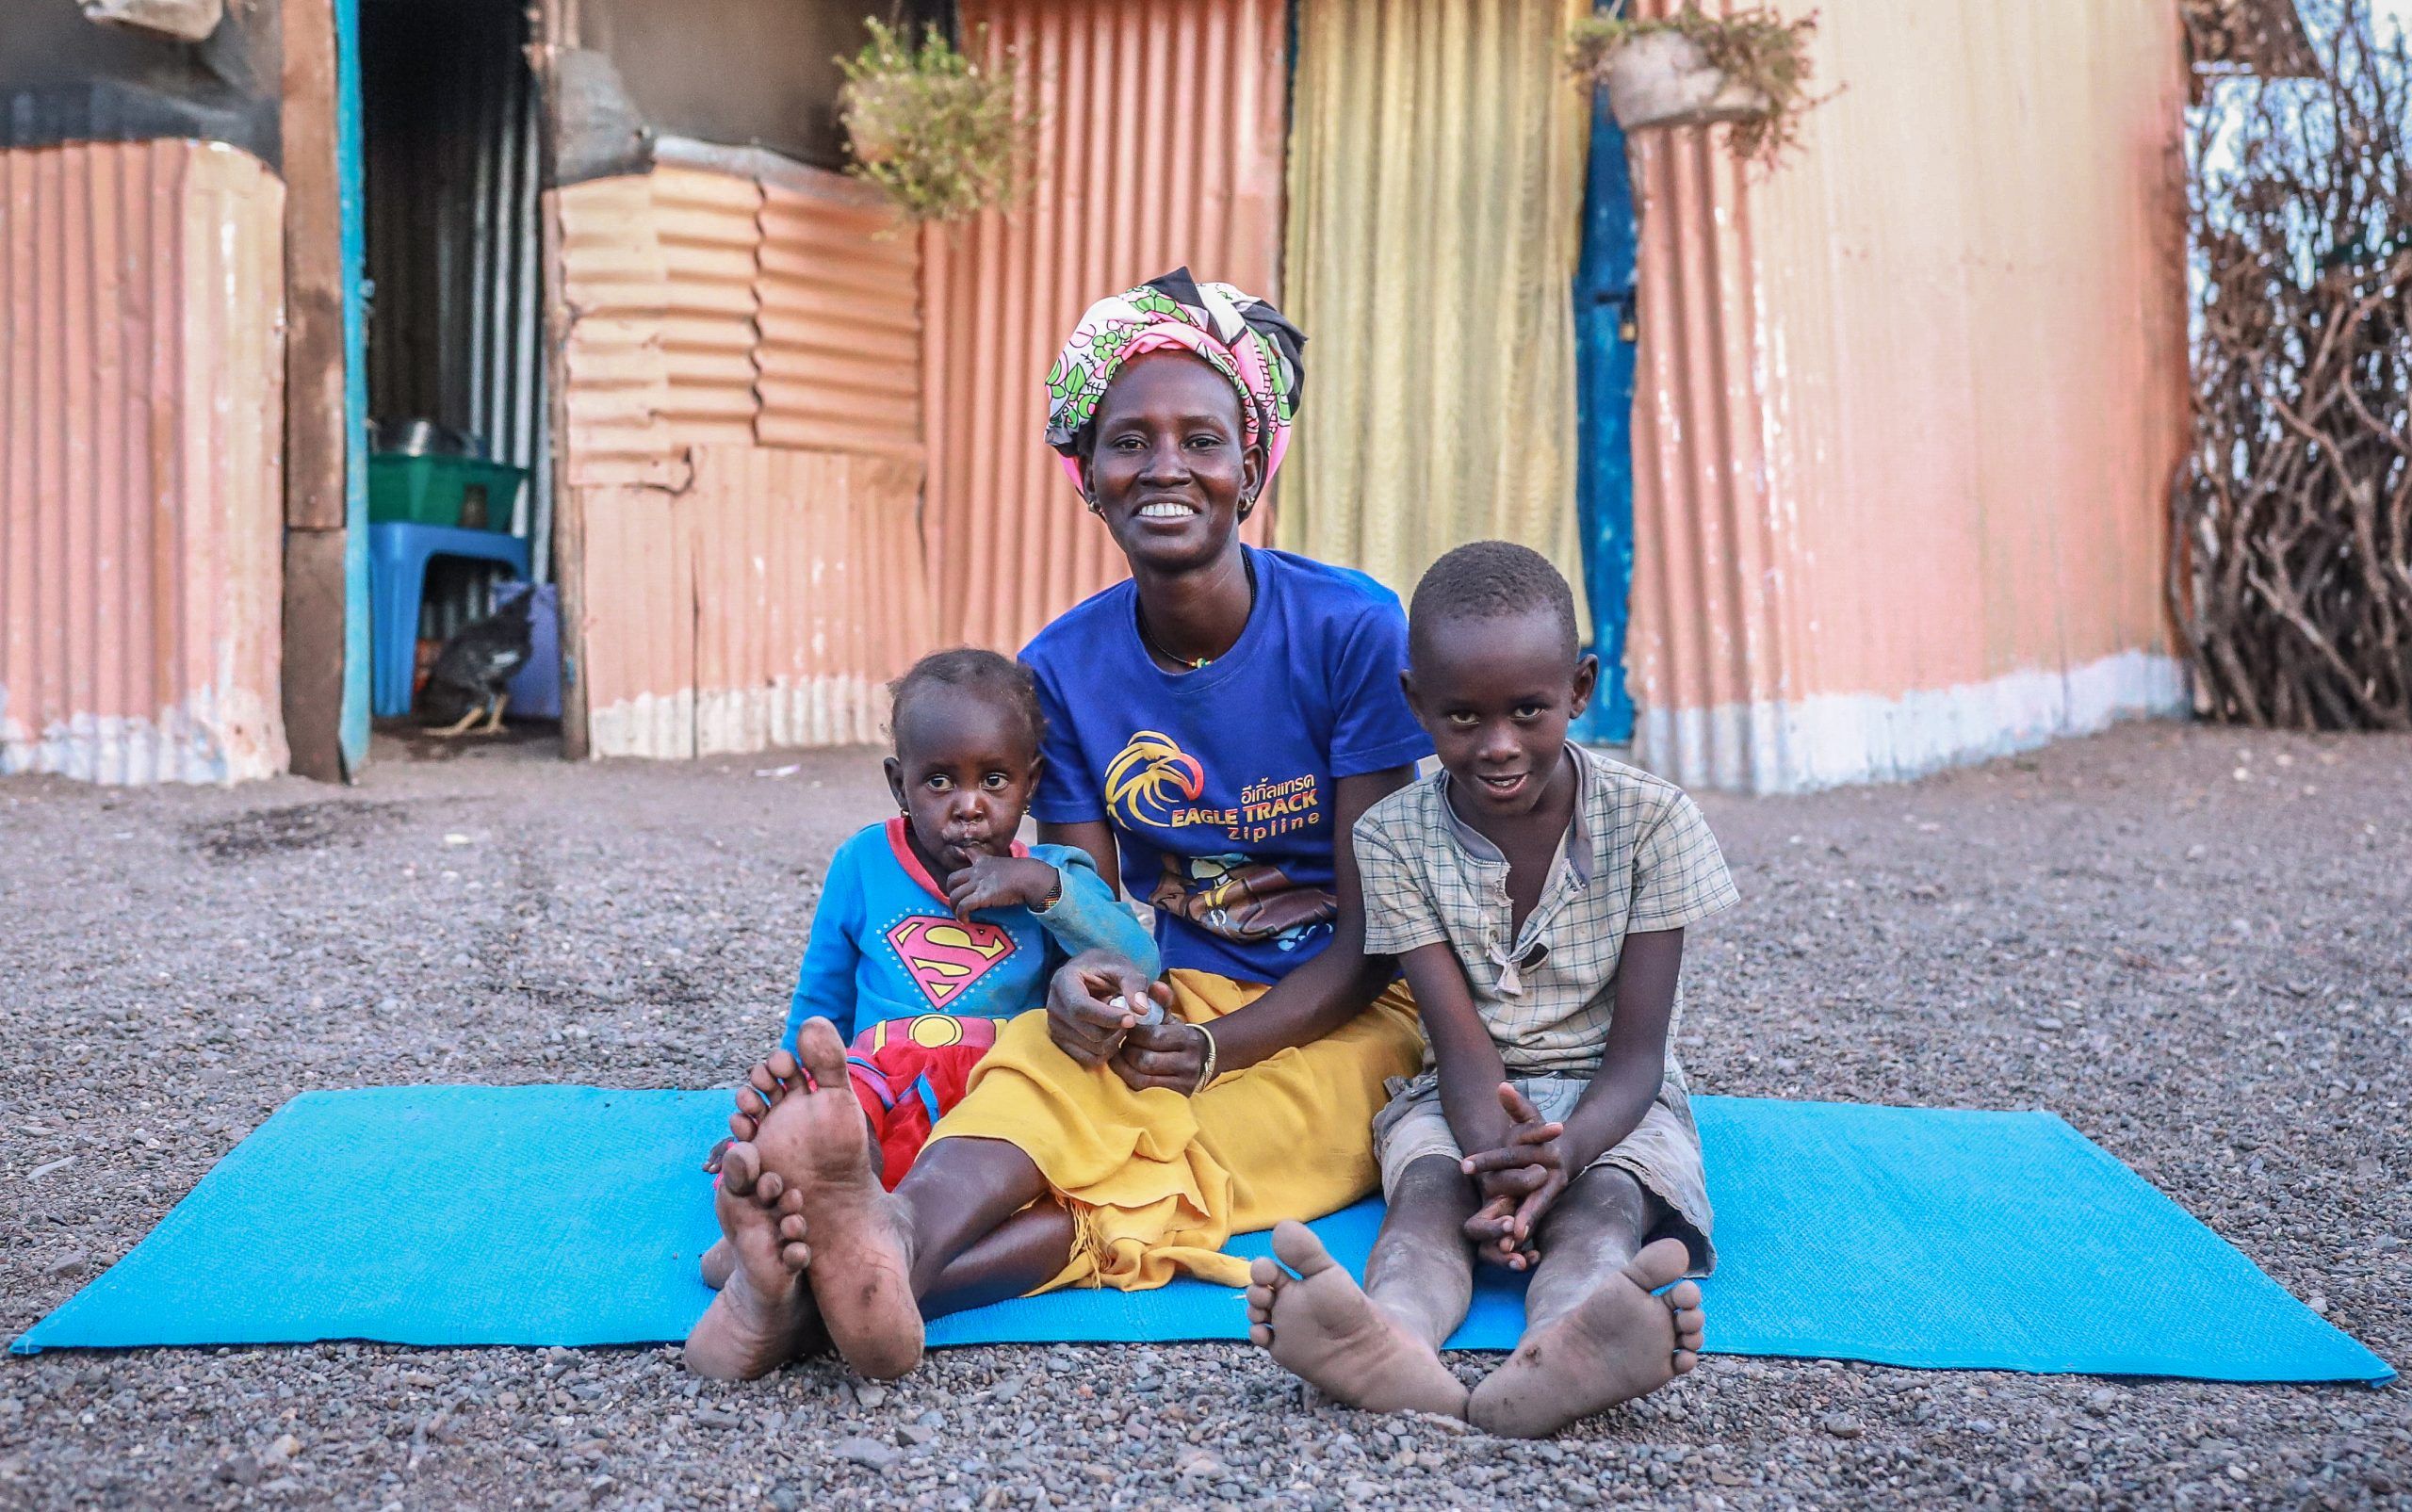 Emily sitting on a blue mat with her two children by her side smiling at the camera.